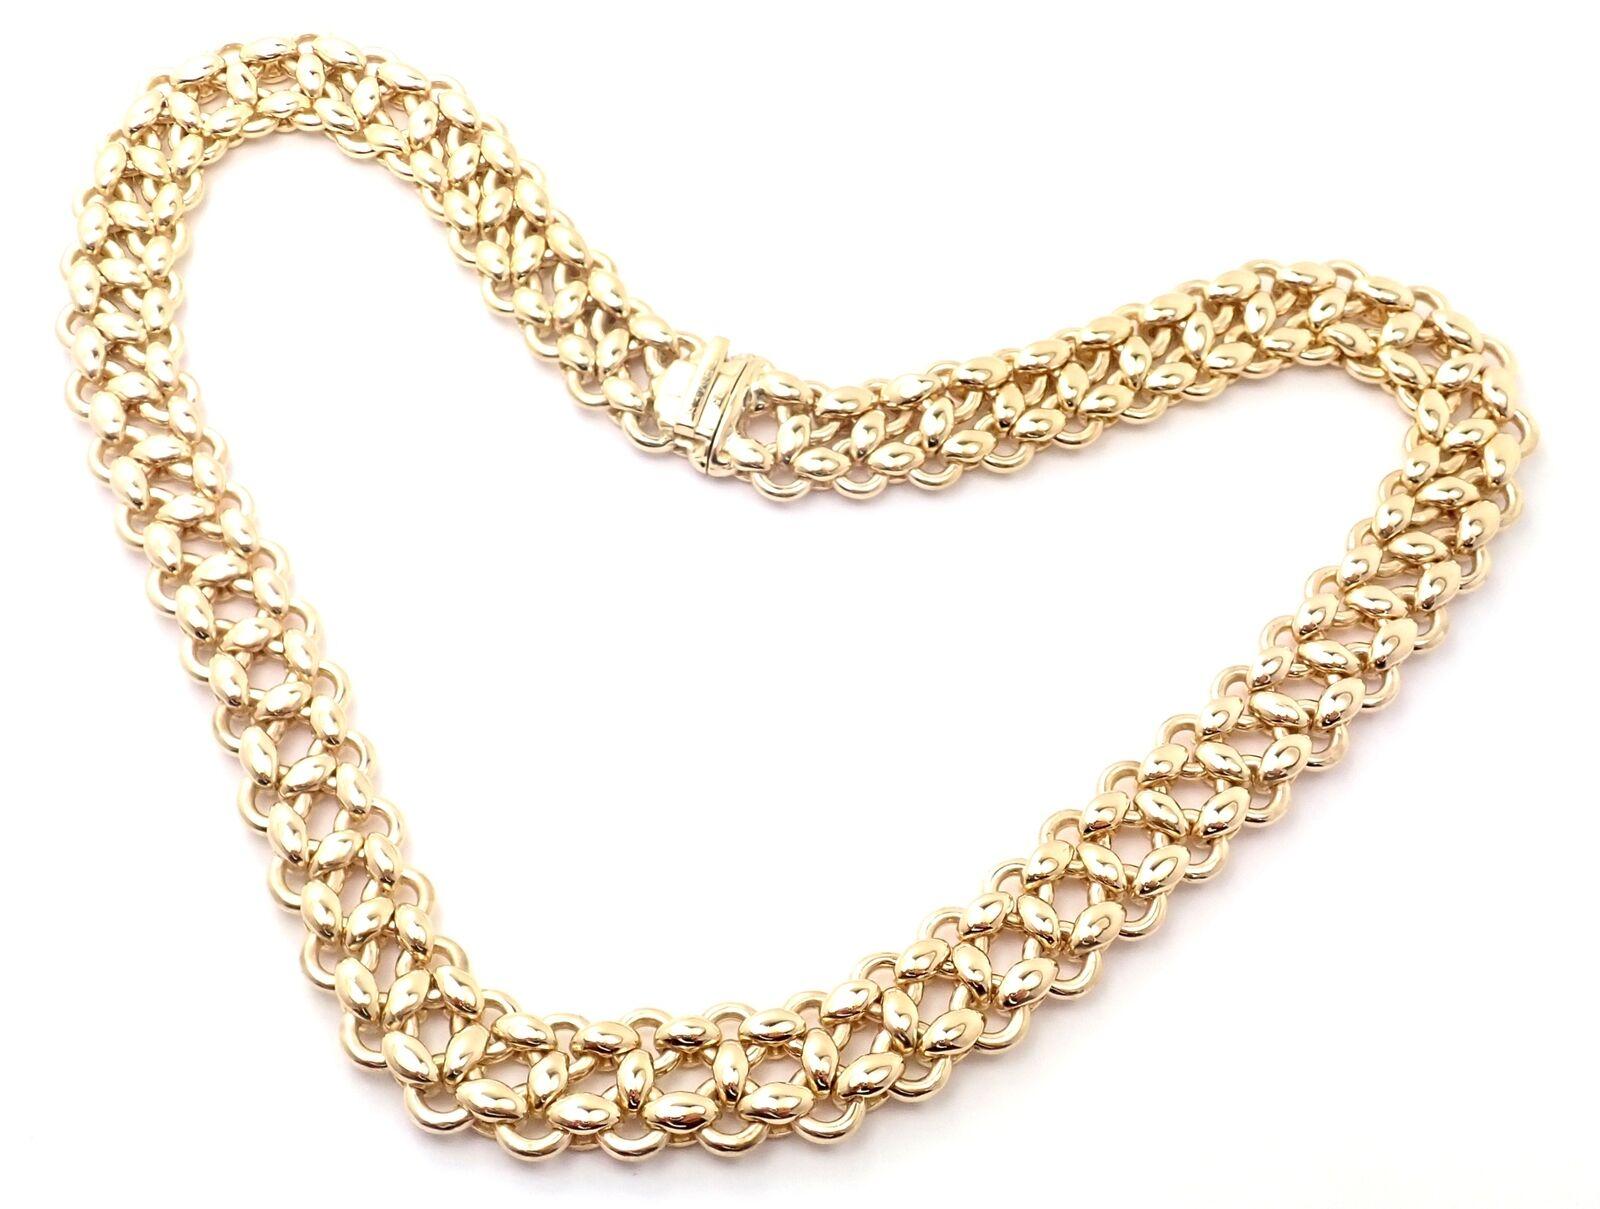 18k Yellow Gold Vintage Link Necklace by Hermes.
Details: 
Weight: 140.6 grams
Chain Length: 15.5